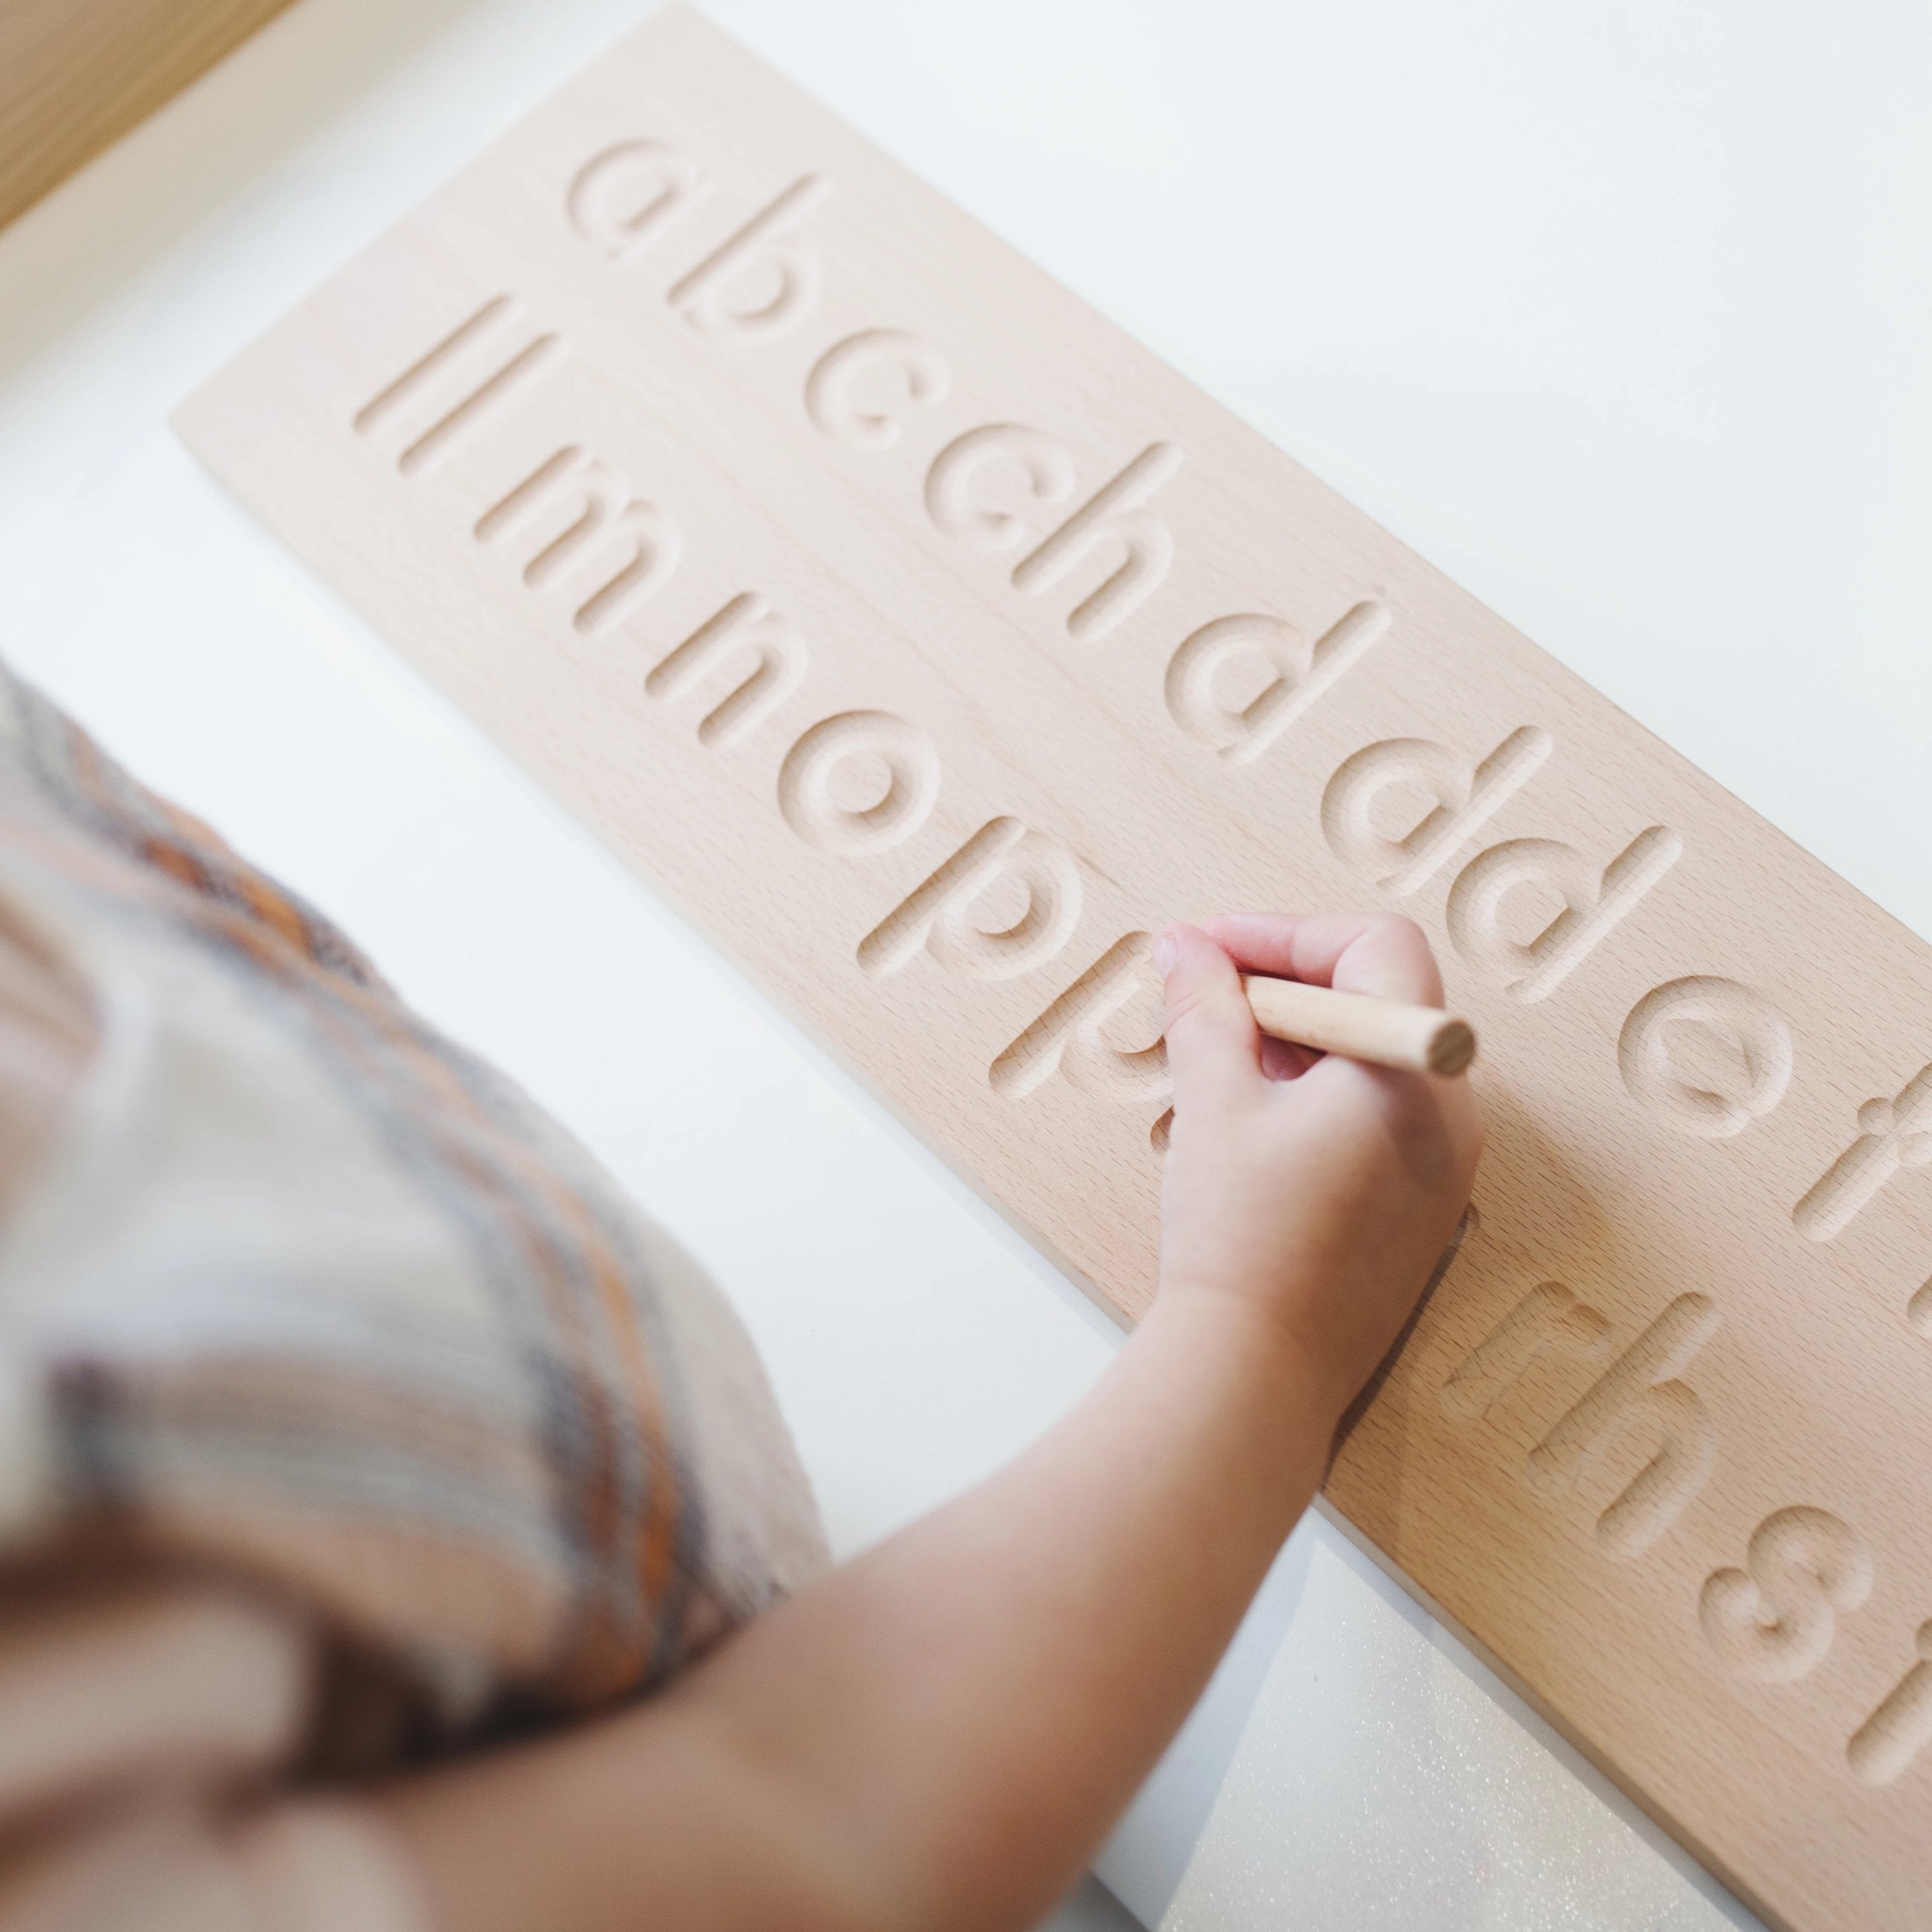 Alphabet Wooden Tracing Board, Assistive Technology, Alphabet Wooden Tracing  Board from Therapy Shoppe Alphabet Tracing Board, Pencil Grips